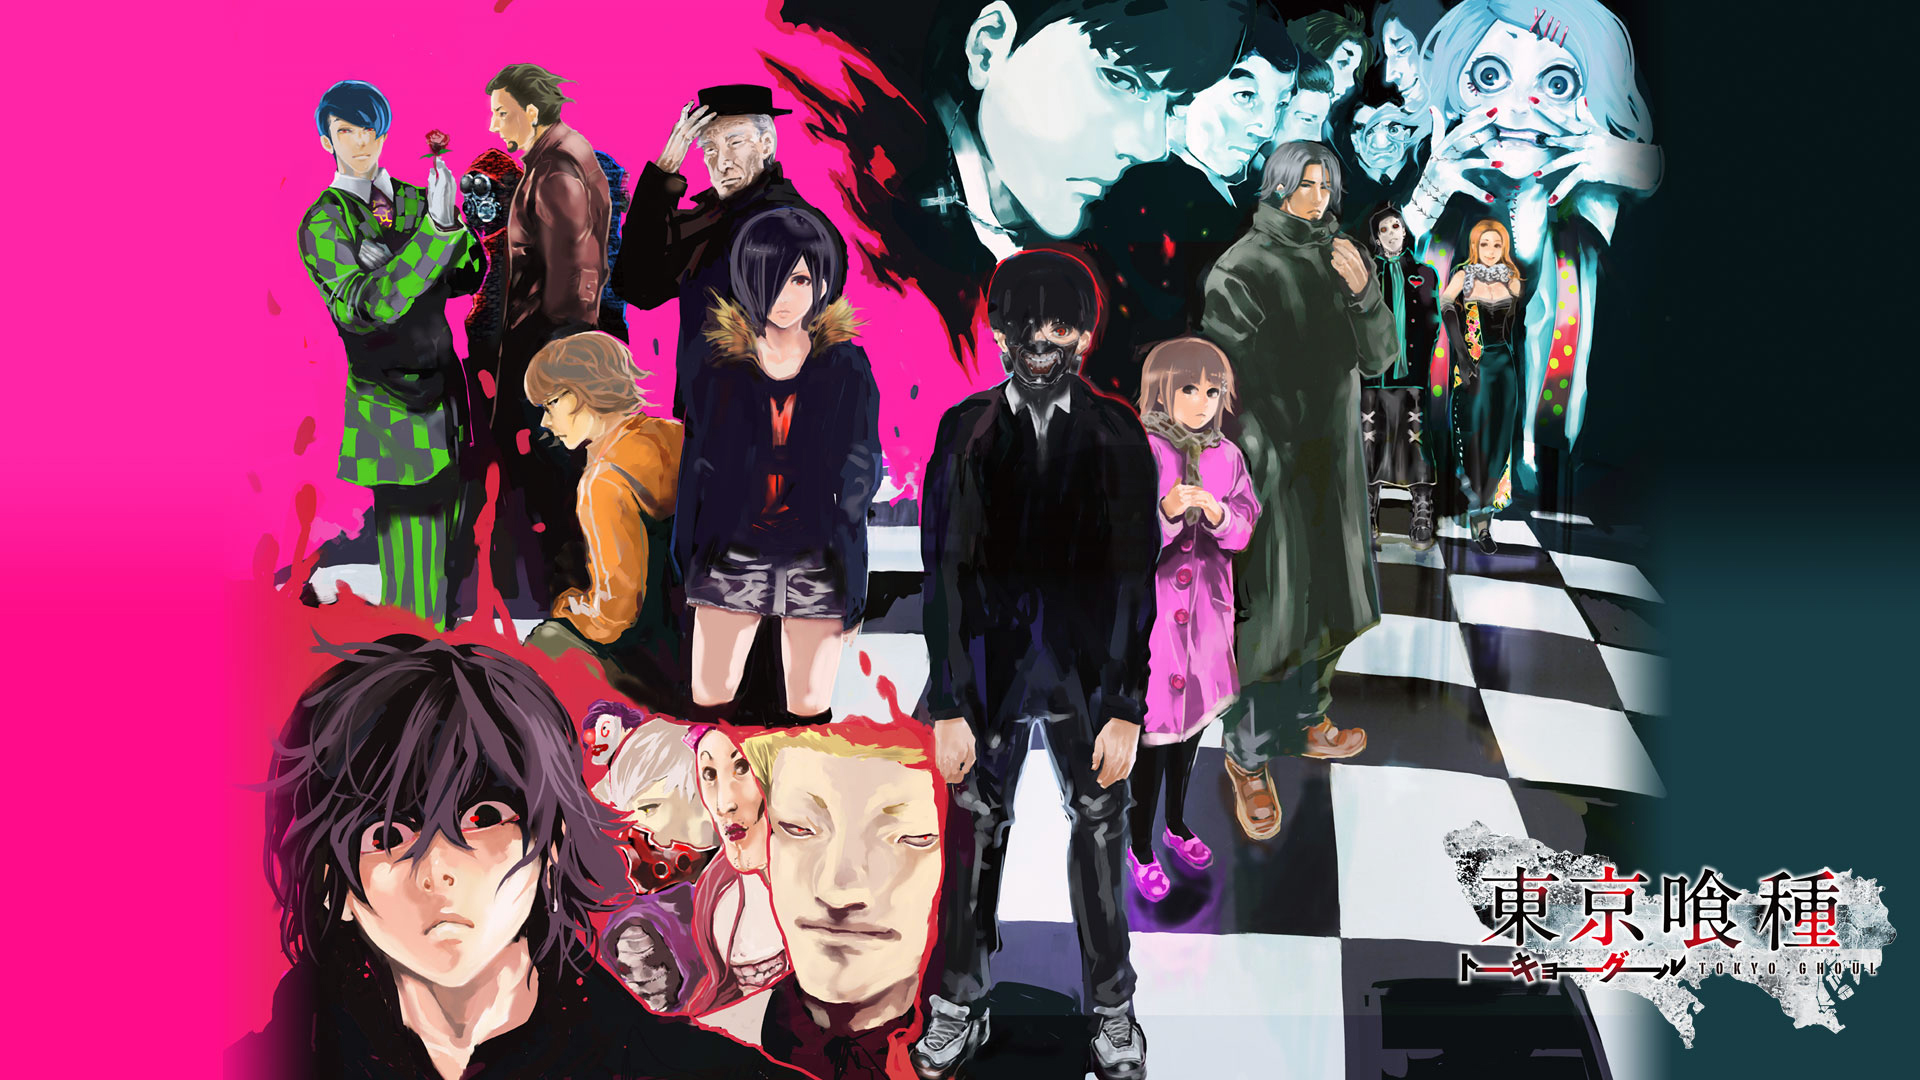 tokyo ghoul characters anime hd 1920x1080 1080p and compatible for